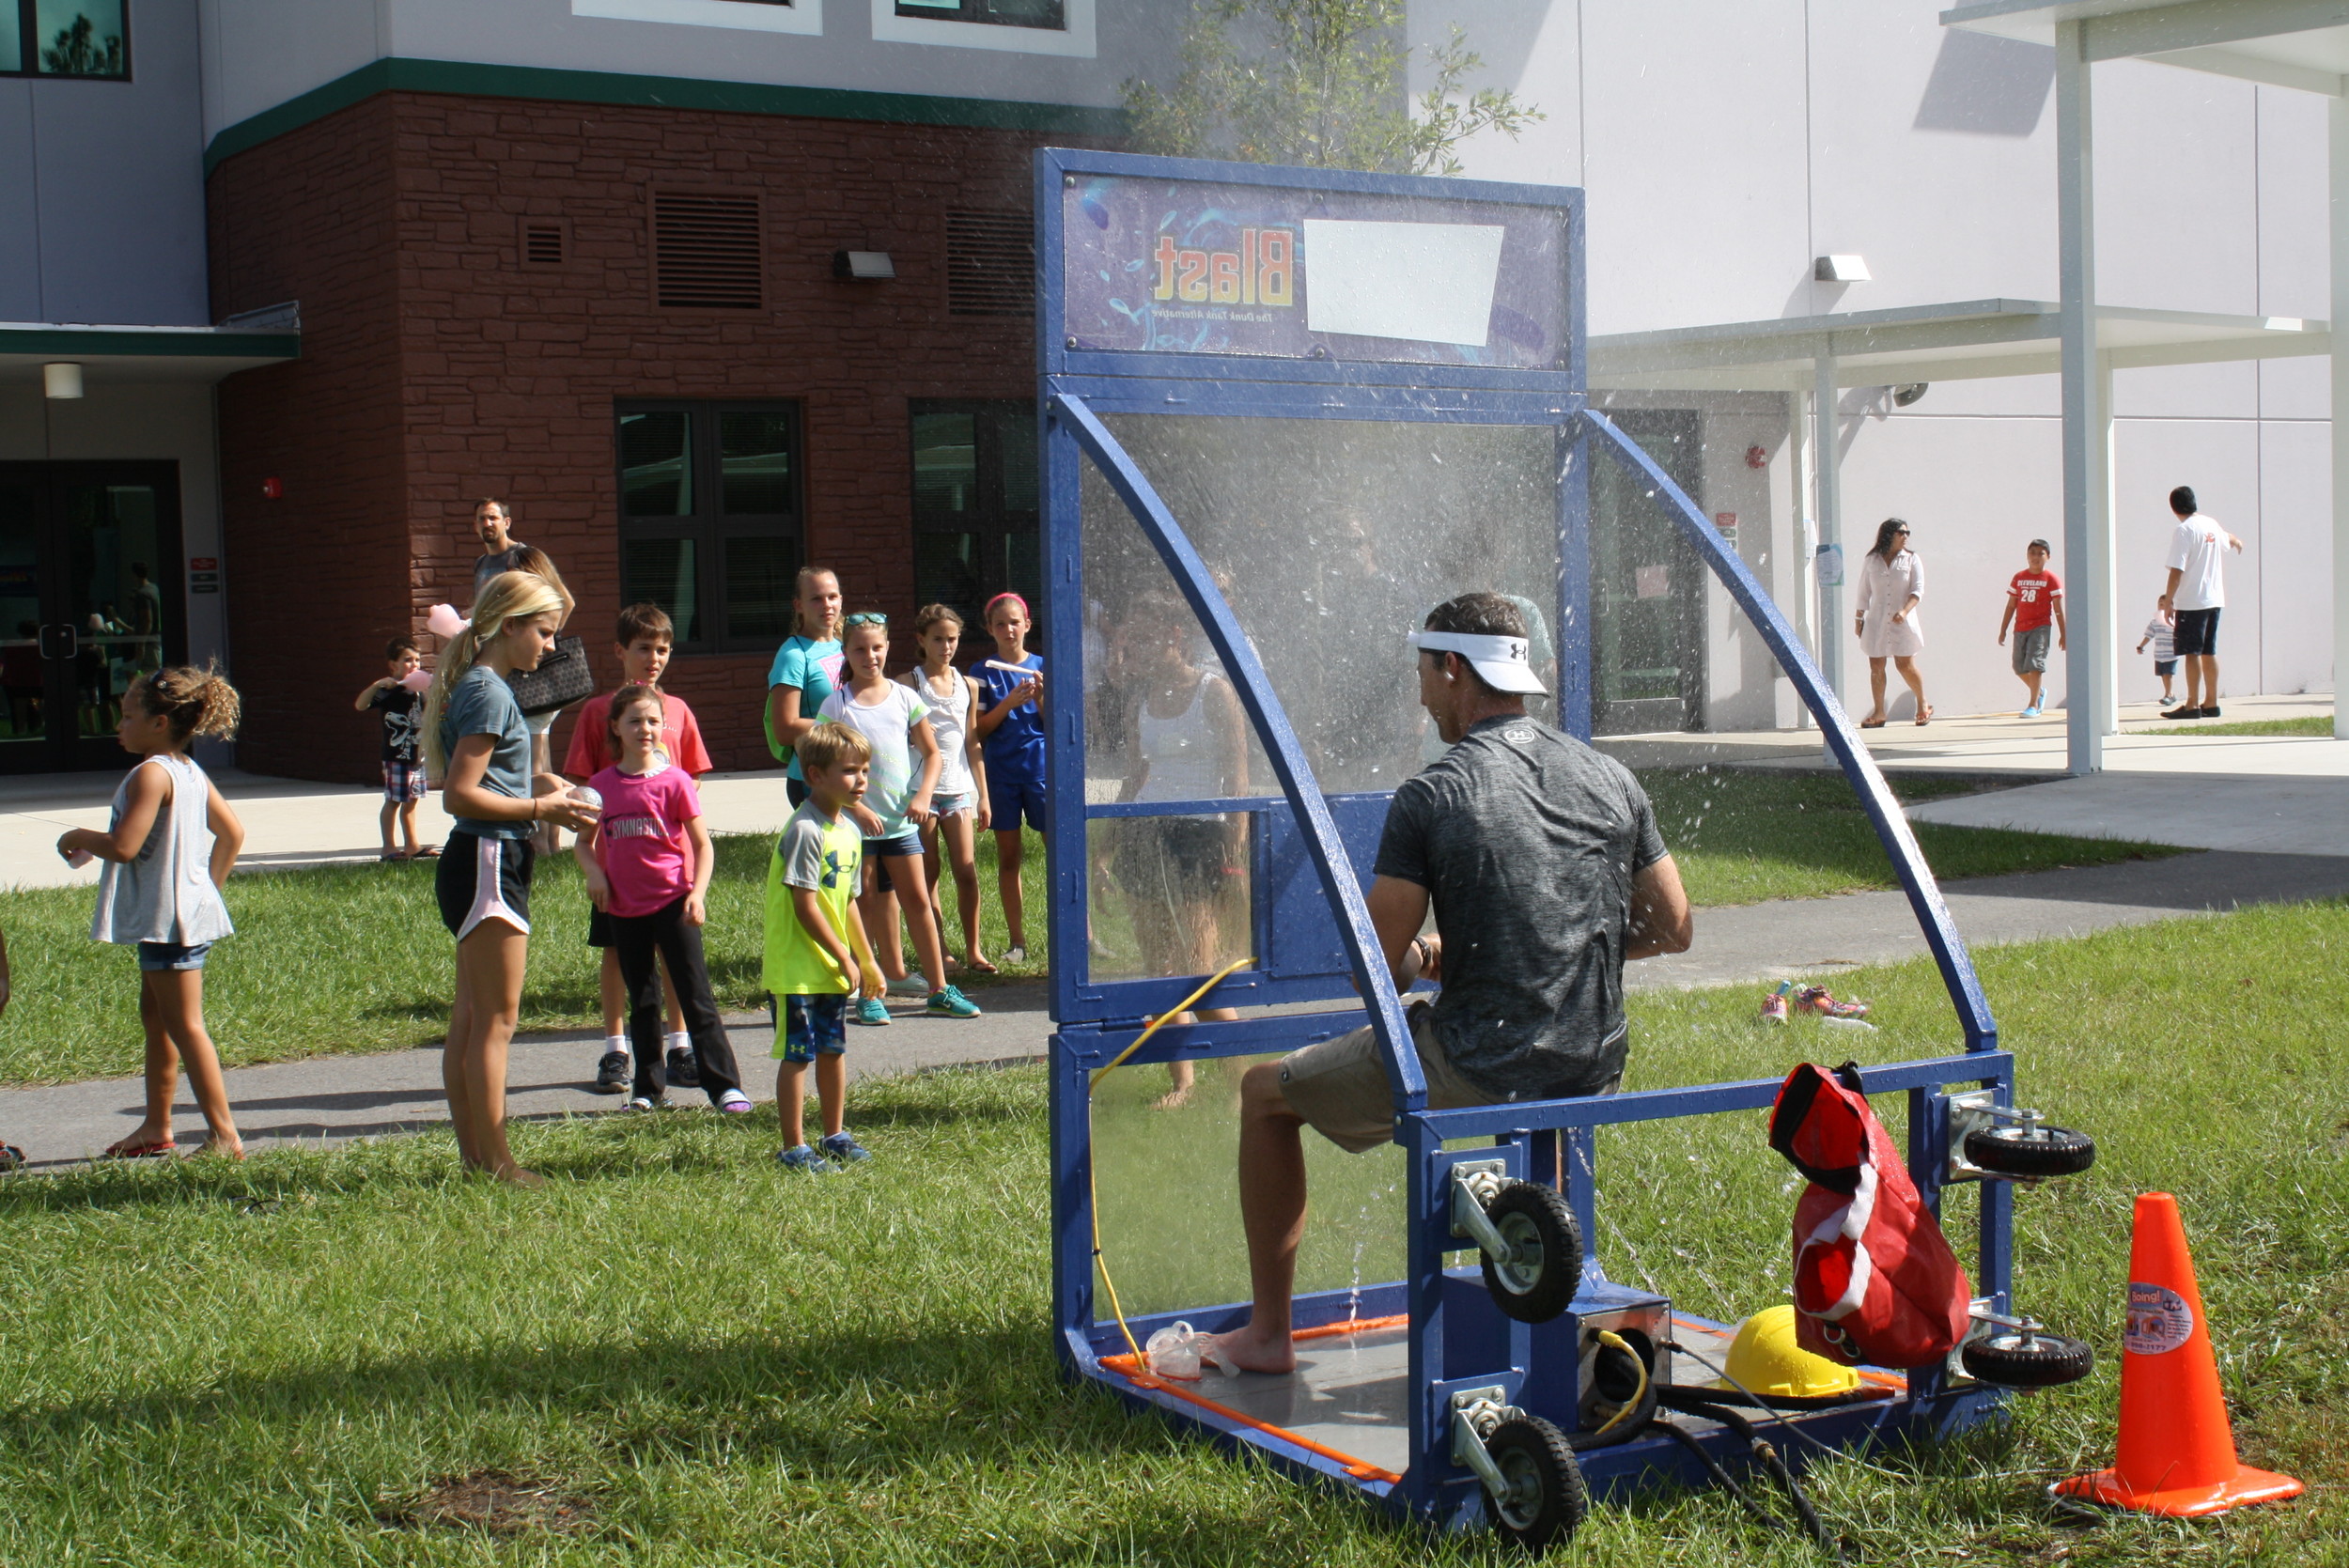 Students were given the opportunity to soak faculty, staff and volunteers at this scaled-down version of a dunk tank.